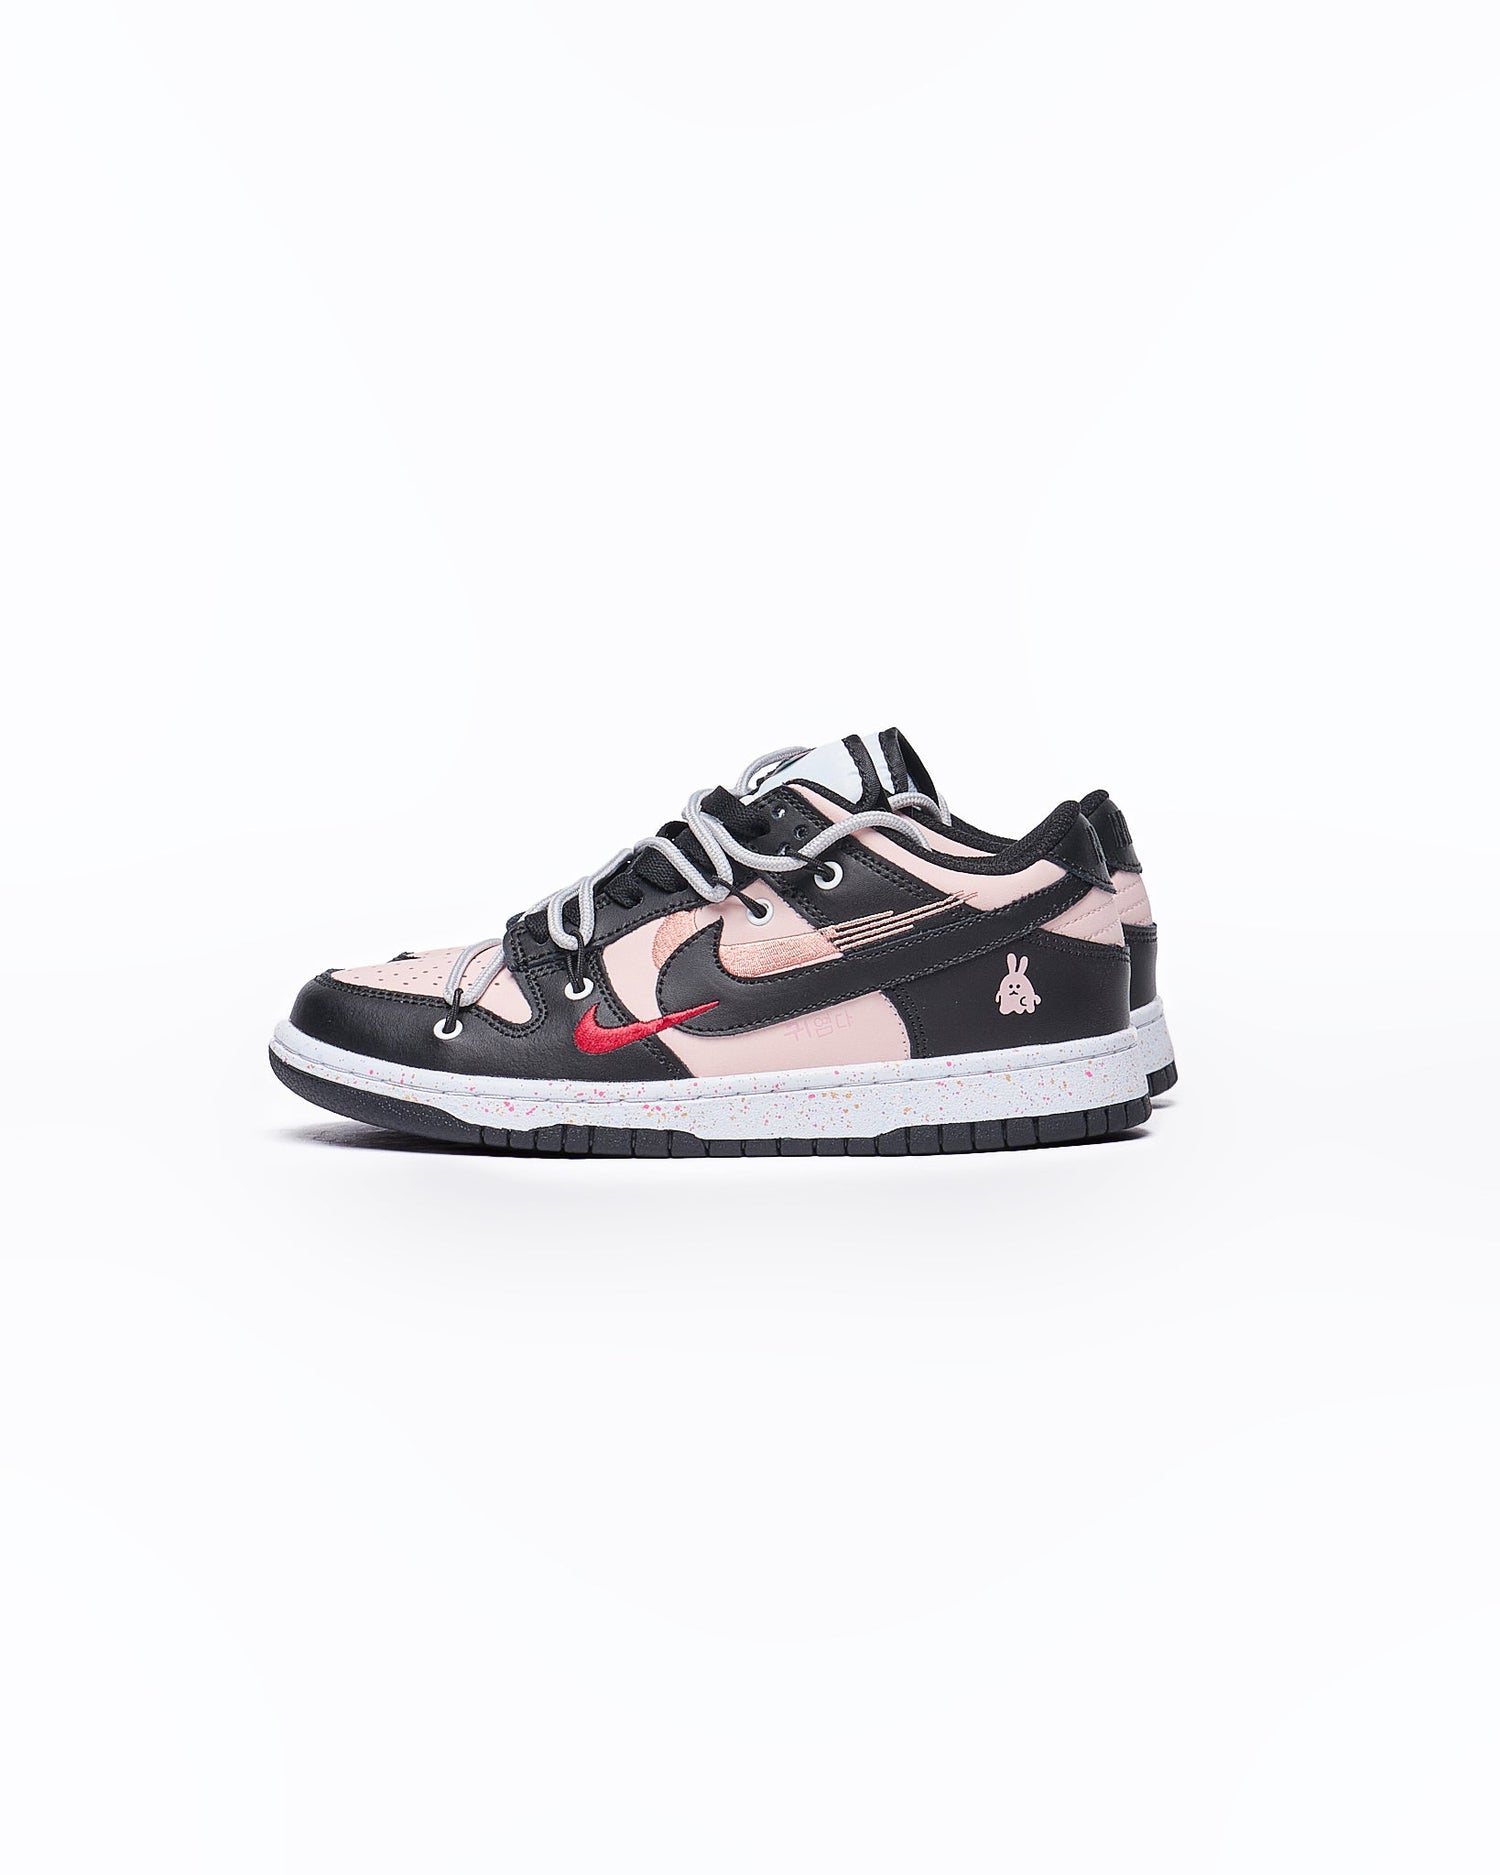 MOI OUTFIT-NIK Dunk Low Lady Pink Sneakers Shoes 75.90